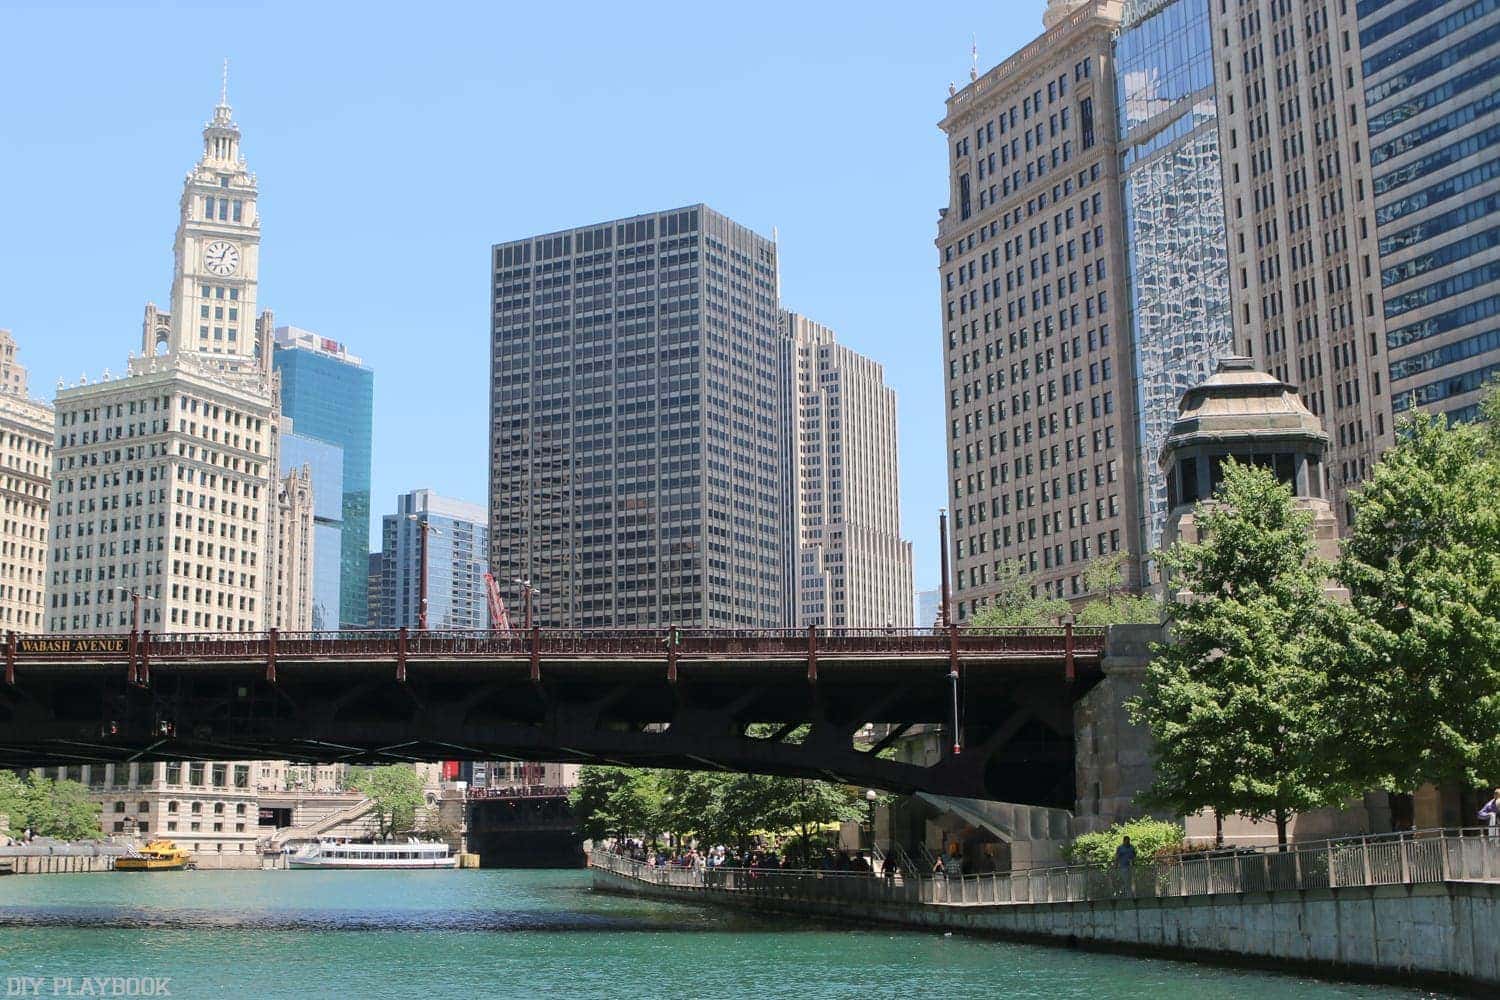 There are so many outstanding Chicago photo spots in the beautiful city we love!